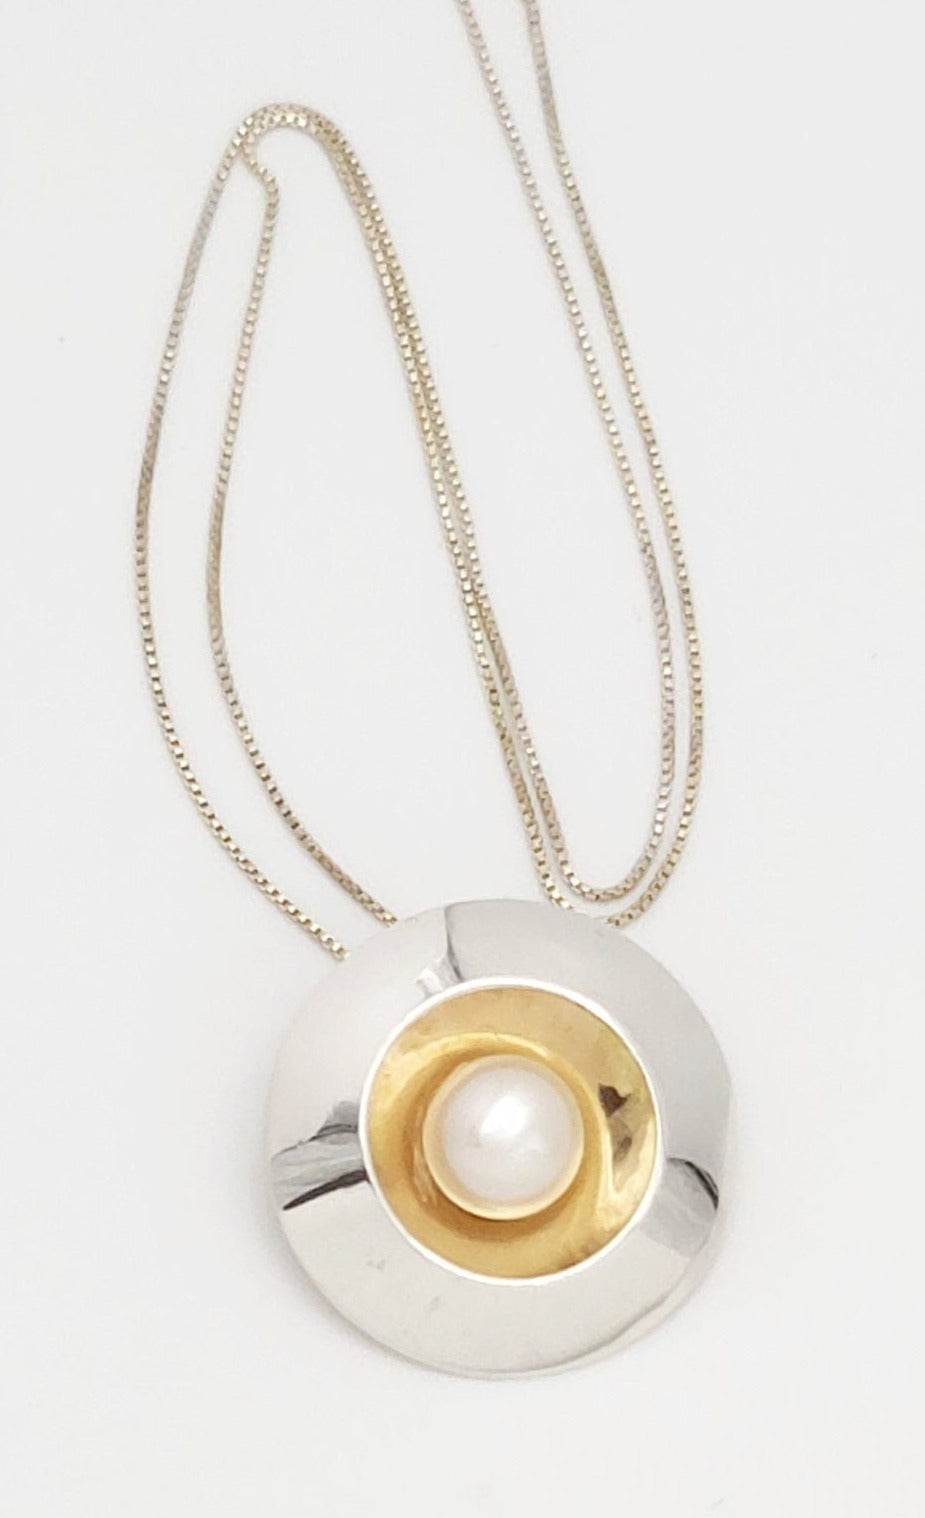 H & BJ Mackie Jewelry USA Designers Harry & BJ Mackie 14k Sterling Pearl Dome Pendant Necklace